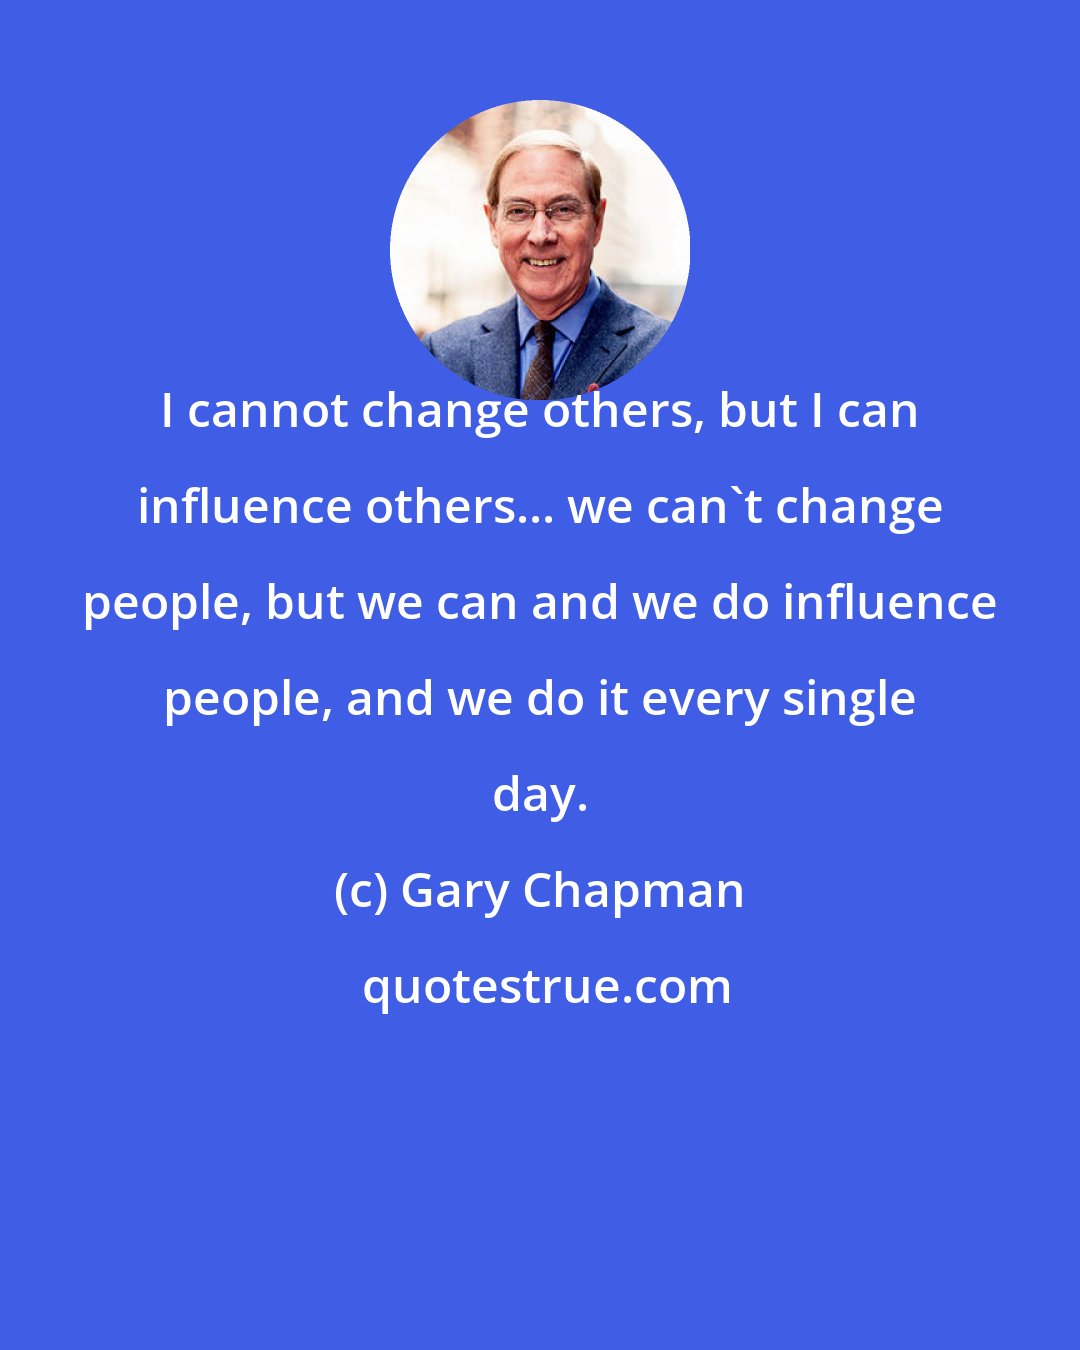 Gary Chapman: I cannot change others, but I can influence others... we can't change people, but we can and we do influence people, and we do it every single day.